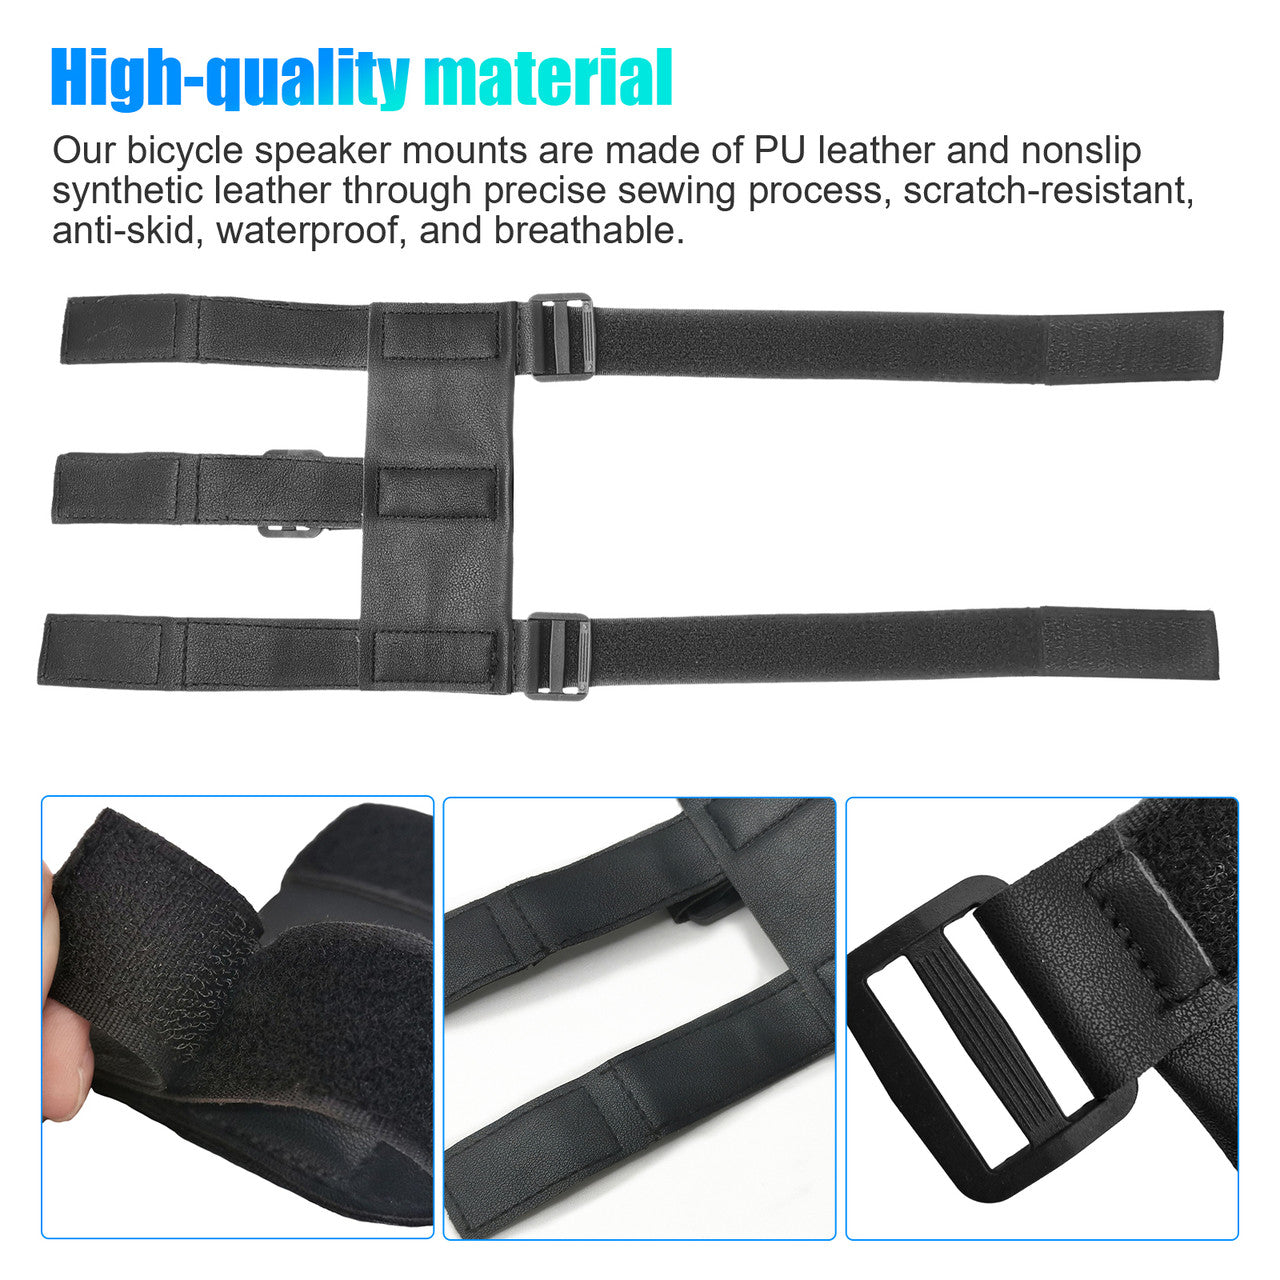 Bluetooth Audio Strap for Various Bluetooth Devices